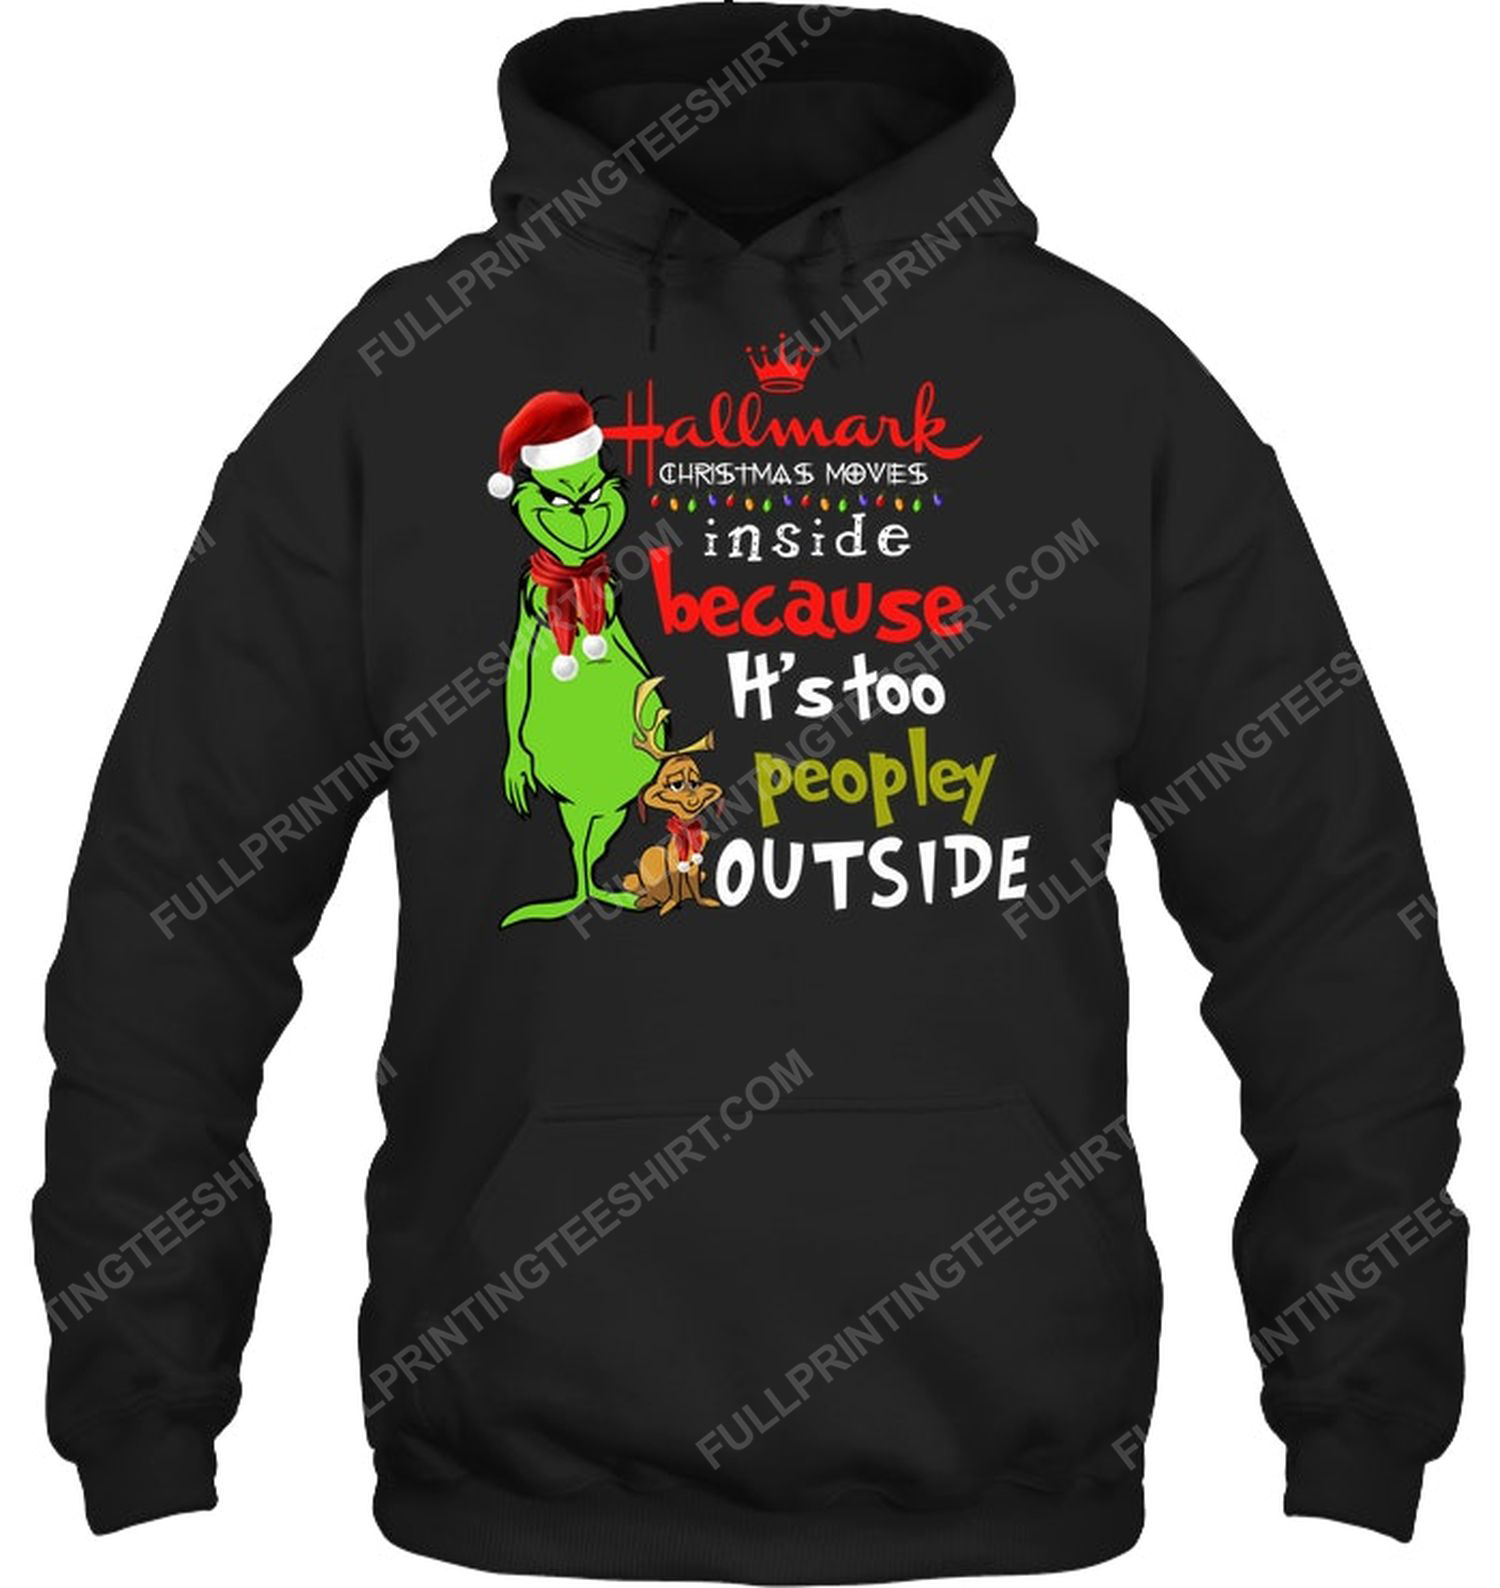 Hallmark christmas movies inside because it's too peopley outside grinch hoodie